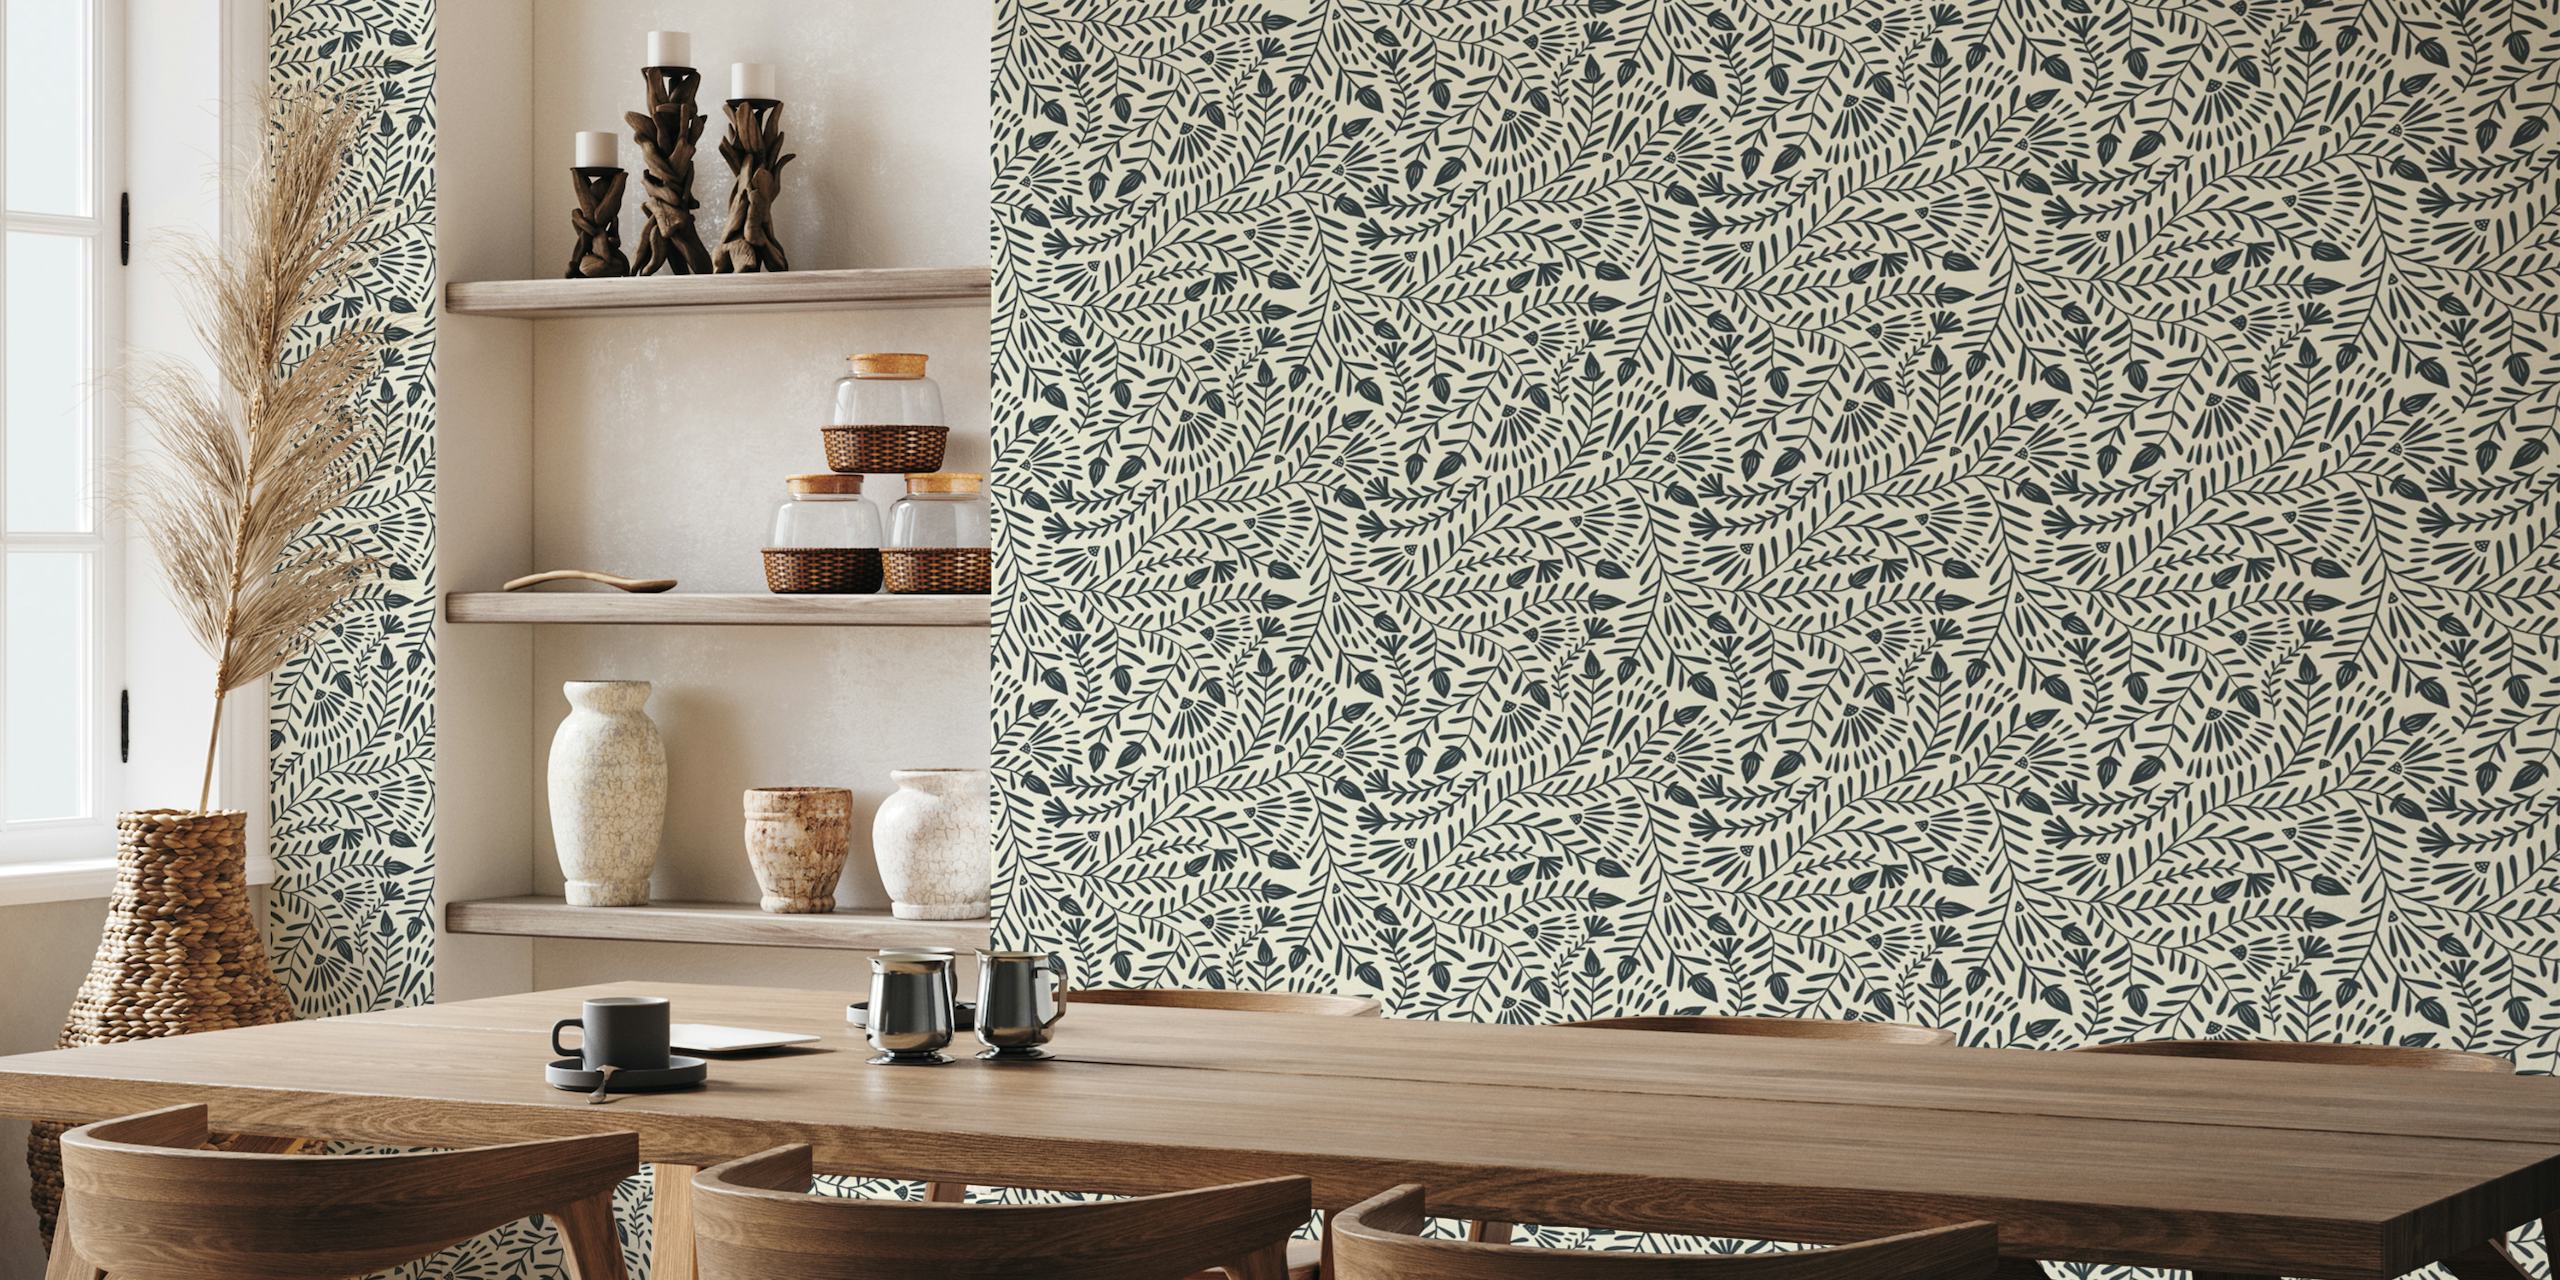 Monochrome botanical pattern wall mural with foliage and organic shapes